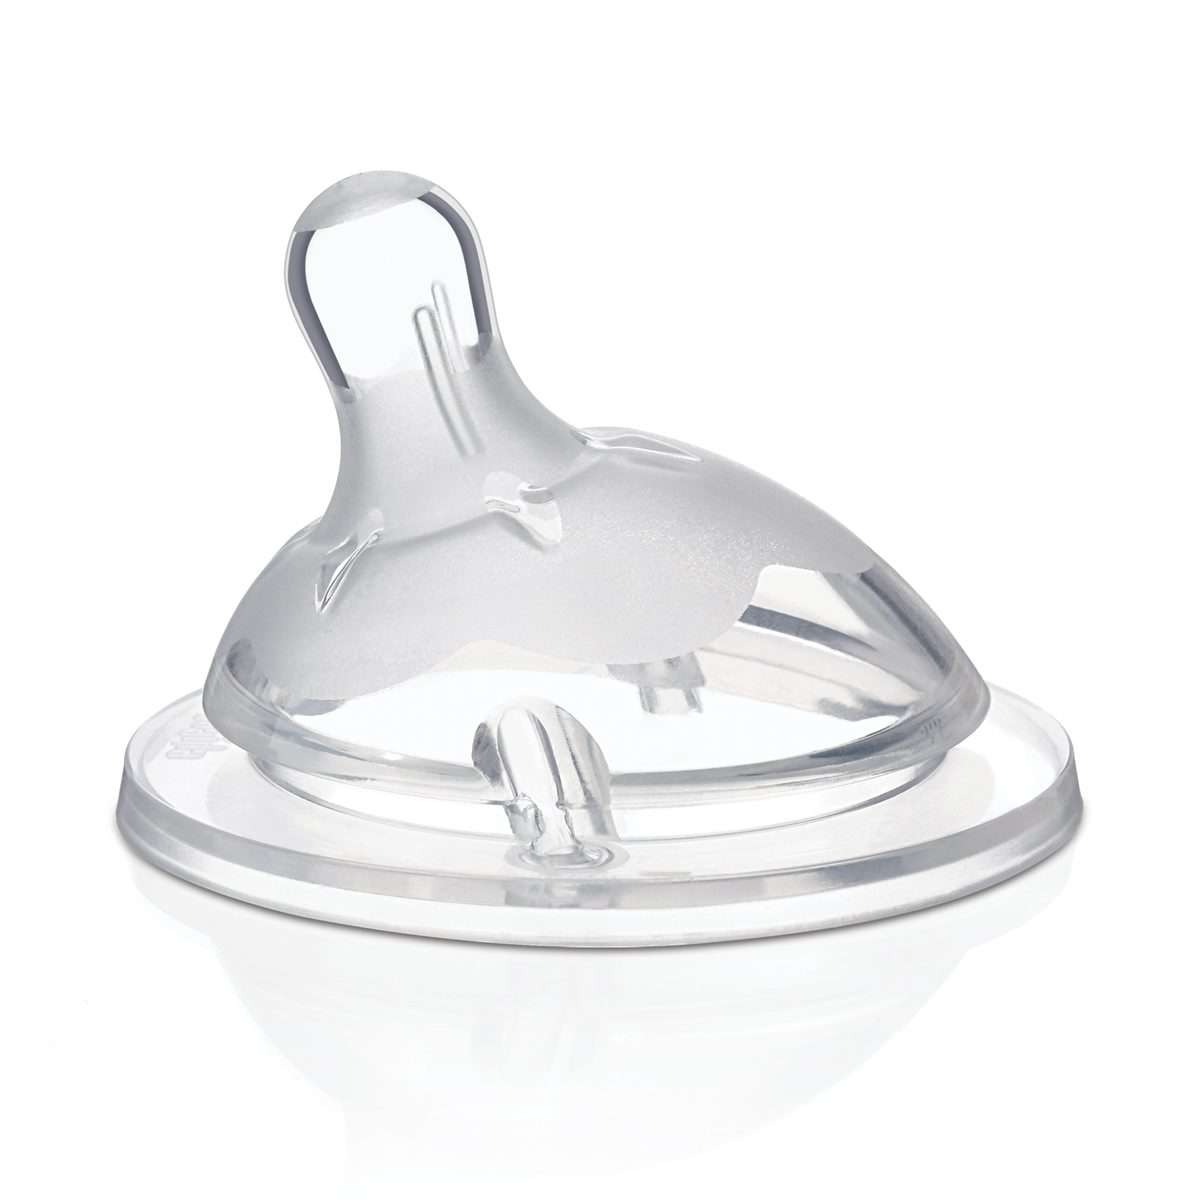 Soft silicone medium flow nipples for babies